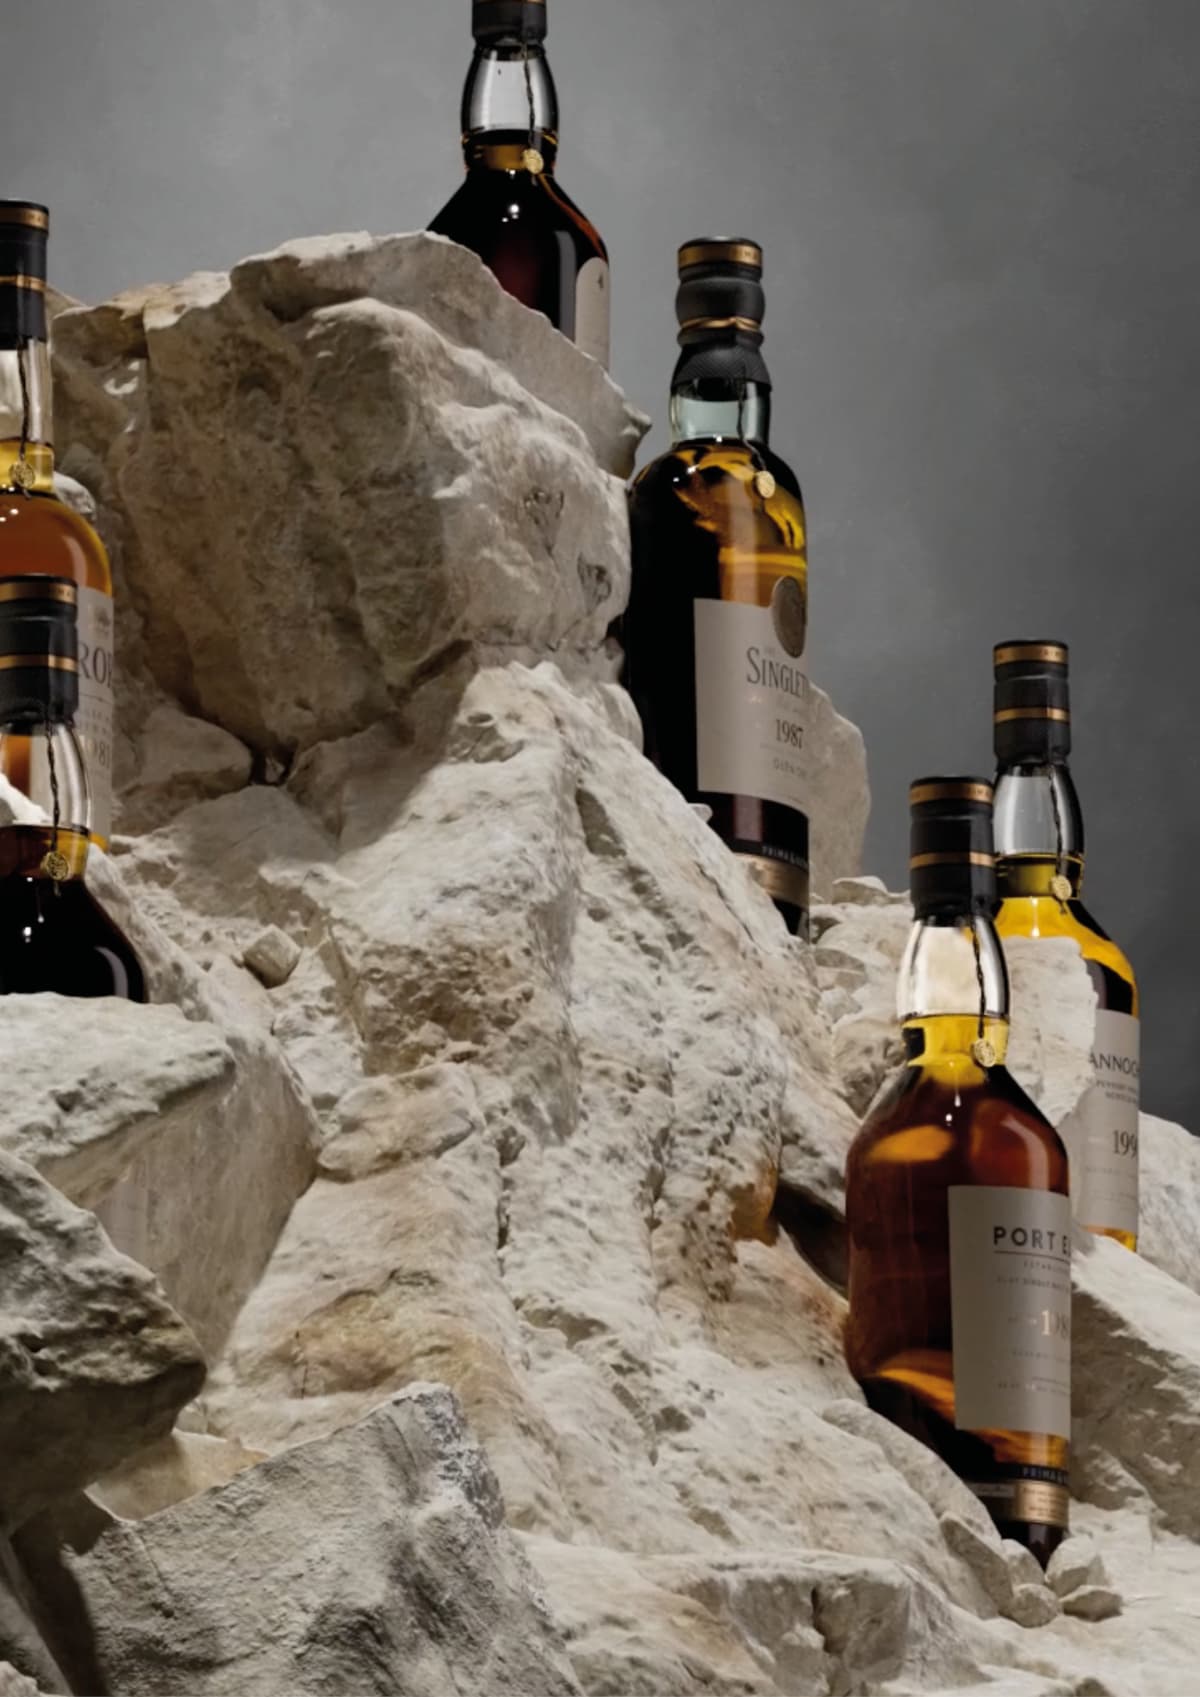 Luxury whisky set against a natural stone background